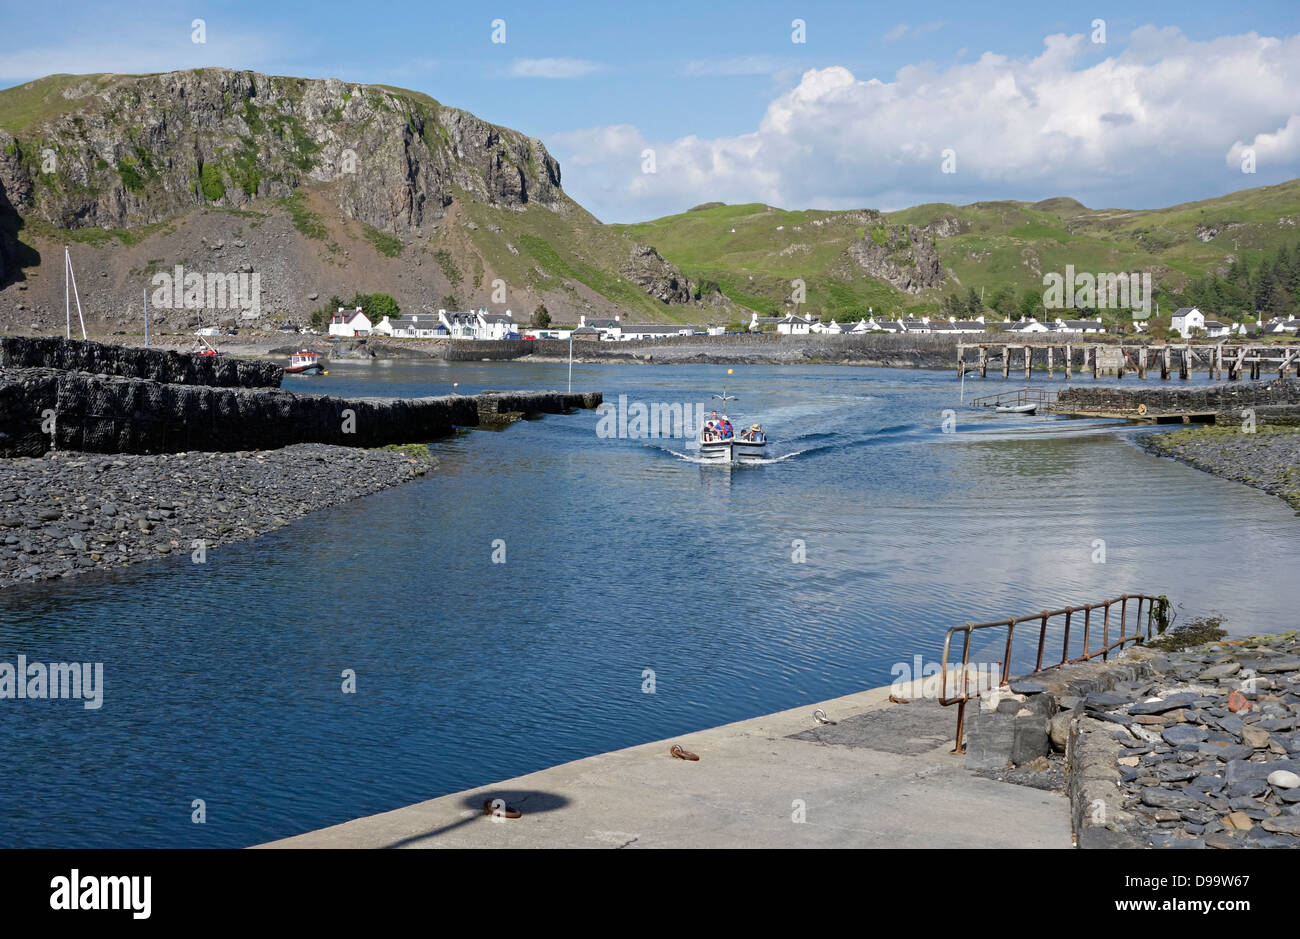 The small passenger ferry is heading towards the Island of Easdale from Easdale town on the island of Seil in Scotland Stock Photo